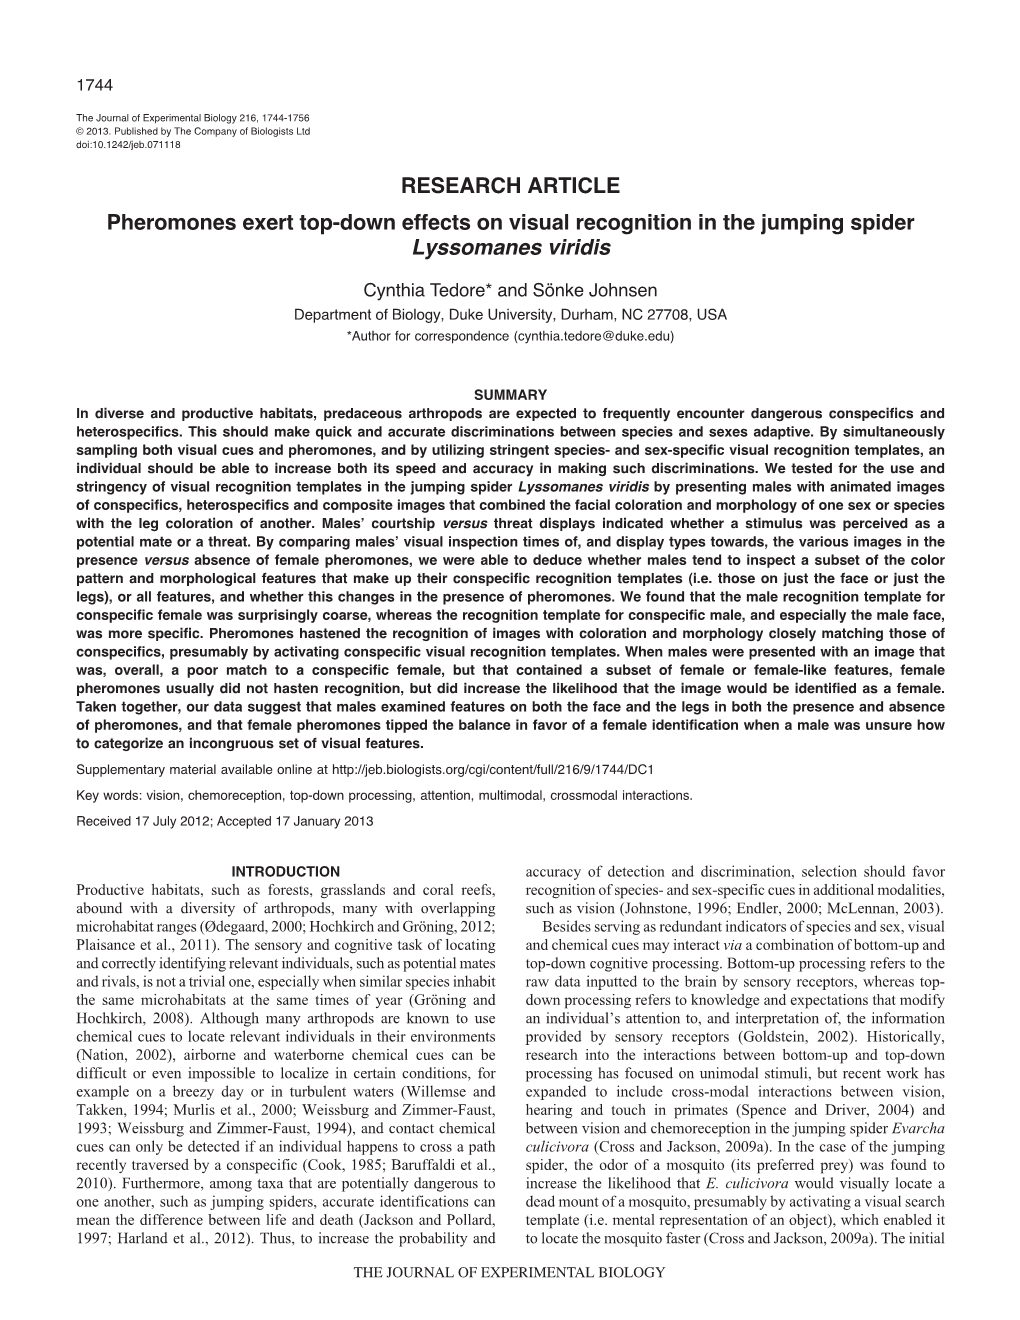 Pheromones Exert Top-Down Effects on Visual Recognition in the Jumping Spider Lyssomanes Viridis